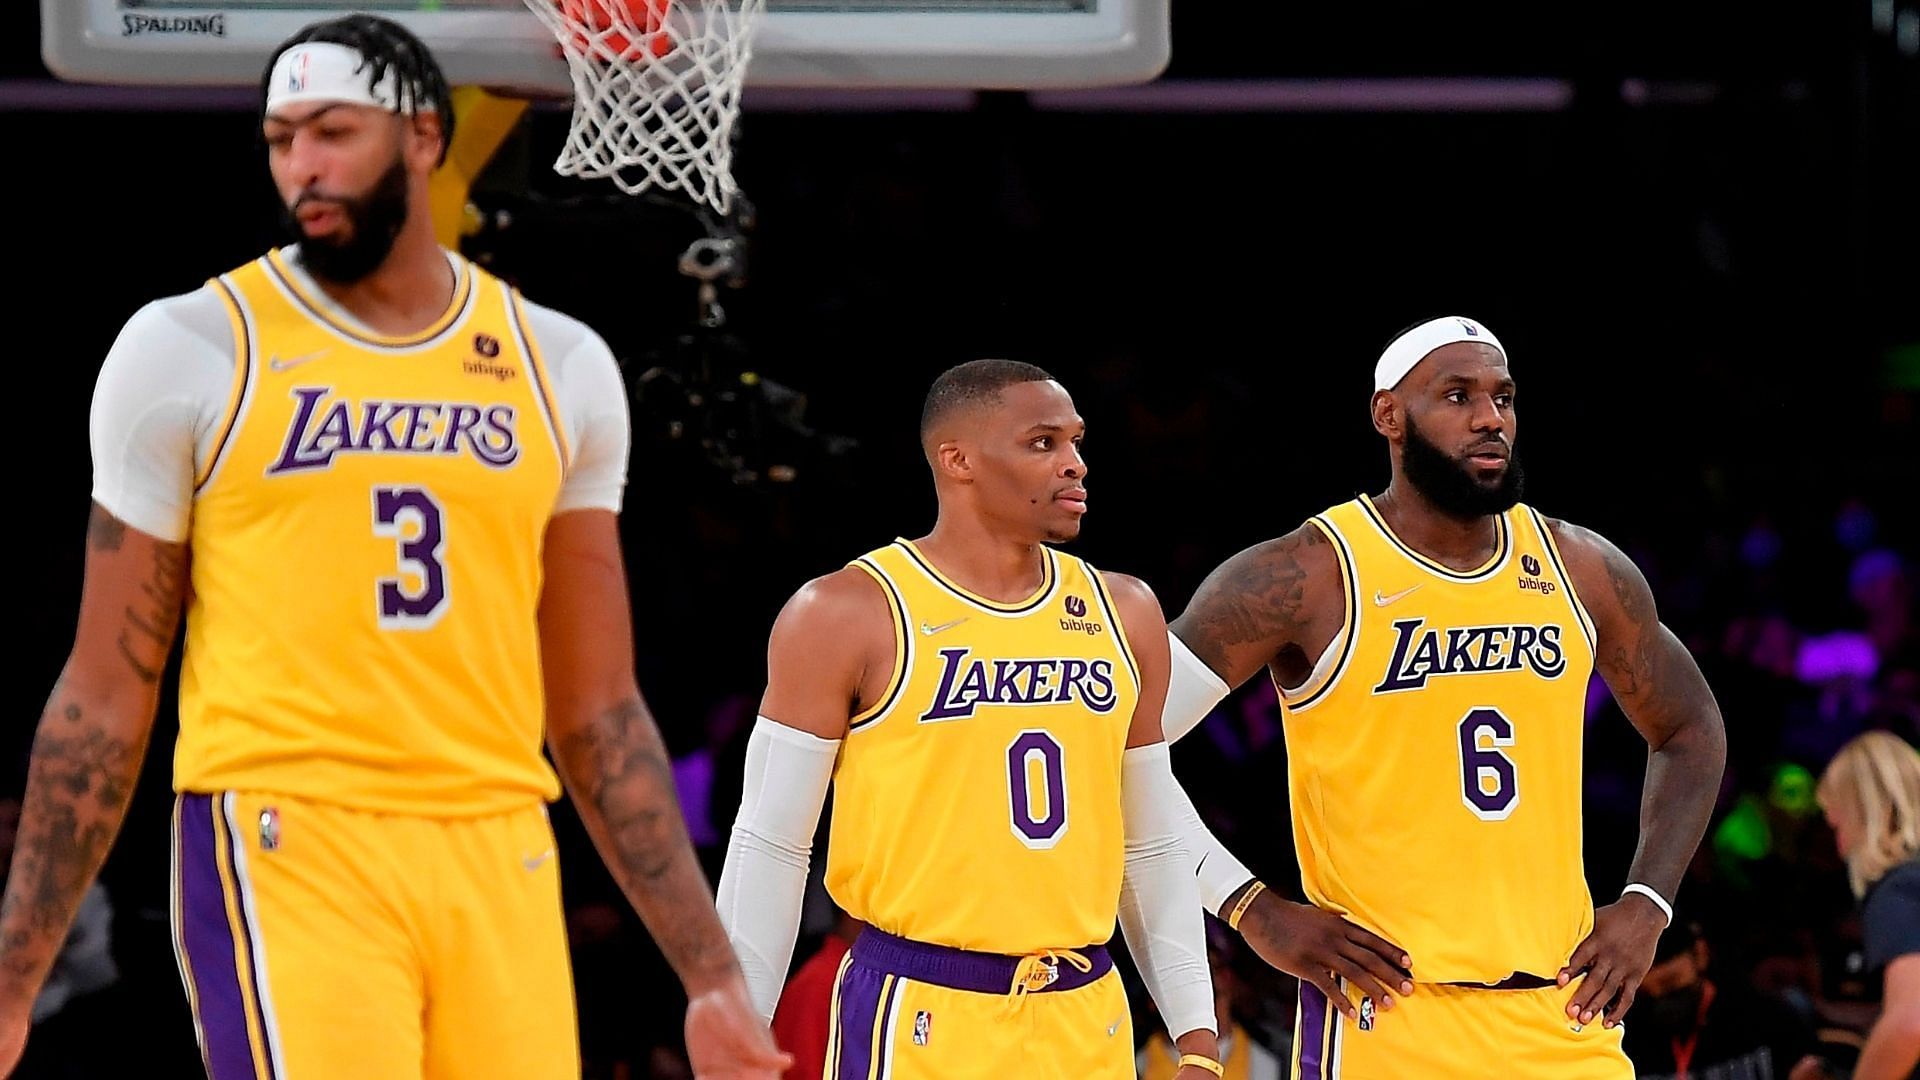 The LA Lakers Big 3 have reunited with Anthony Davis&#039; return after a knee injury. [Photo: NBA.com Canada]